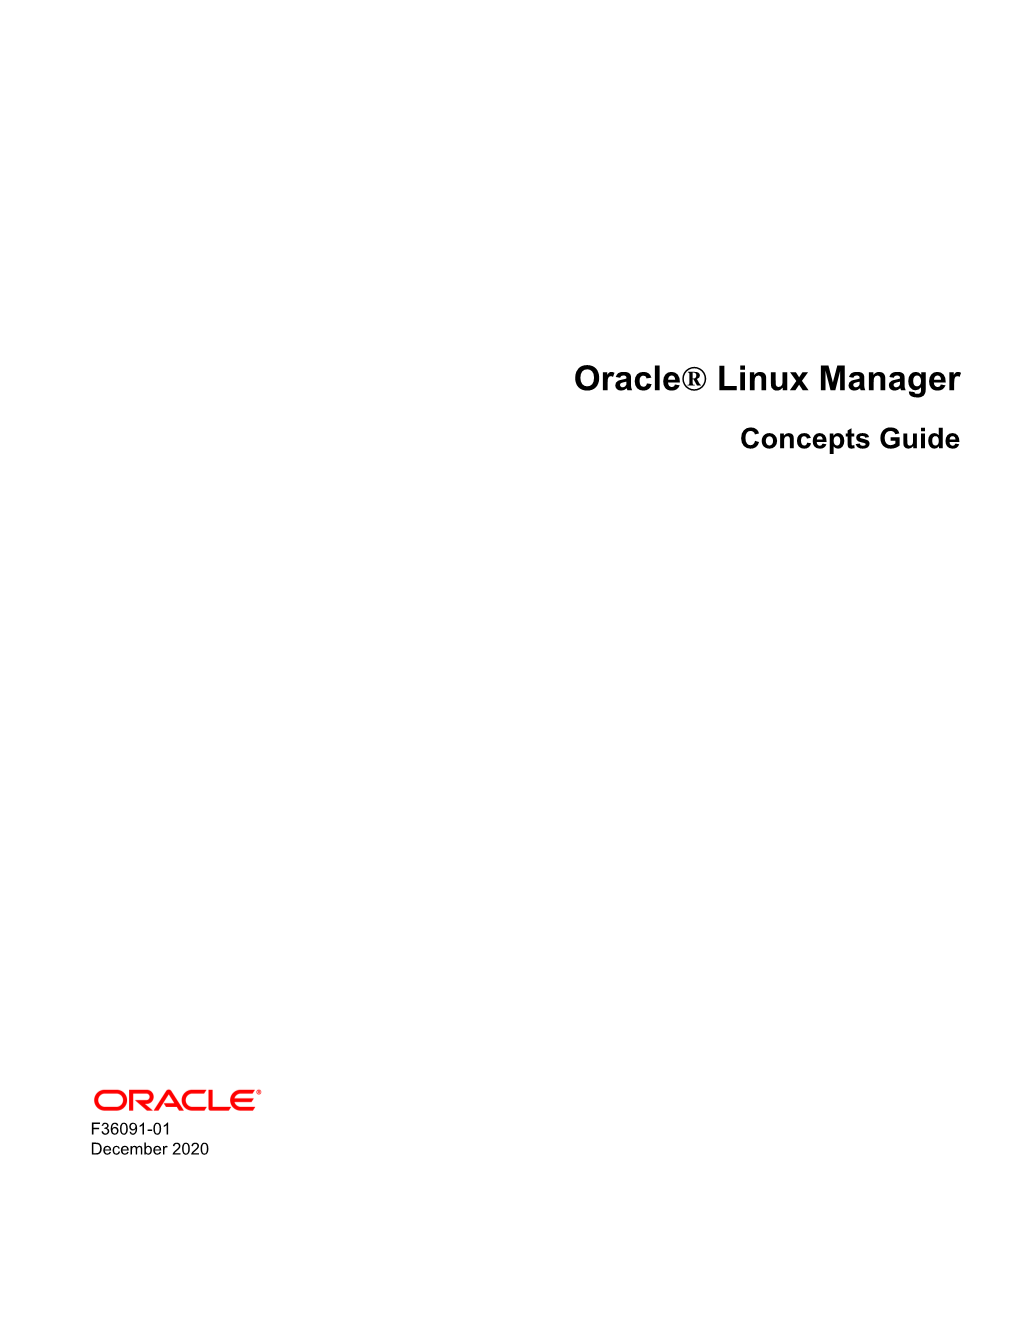 Oracle® Linux Manager Concepts Guide